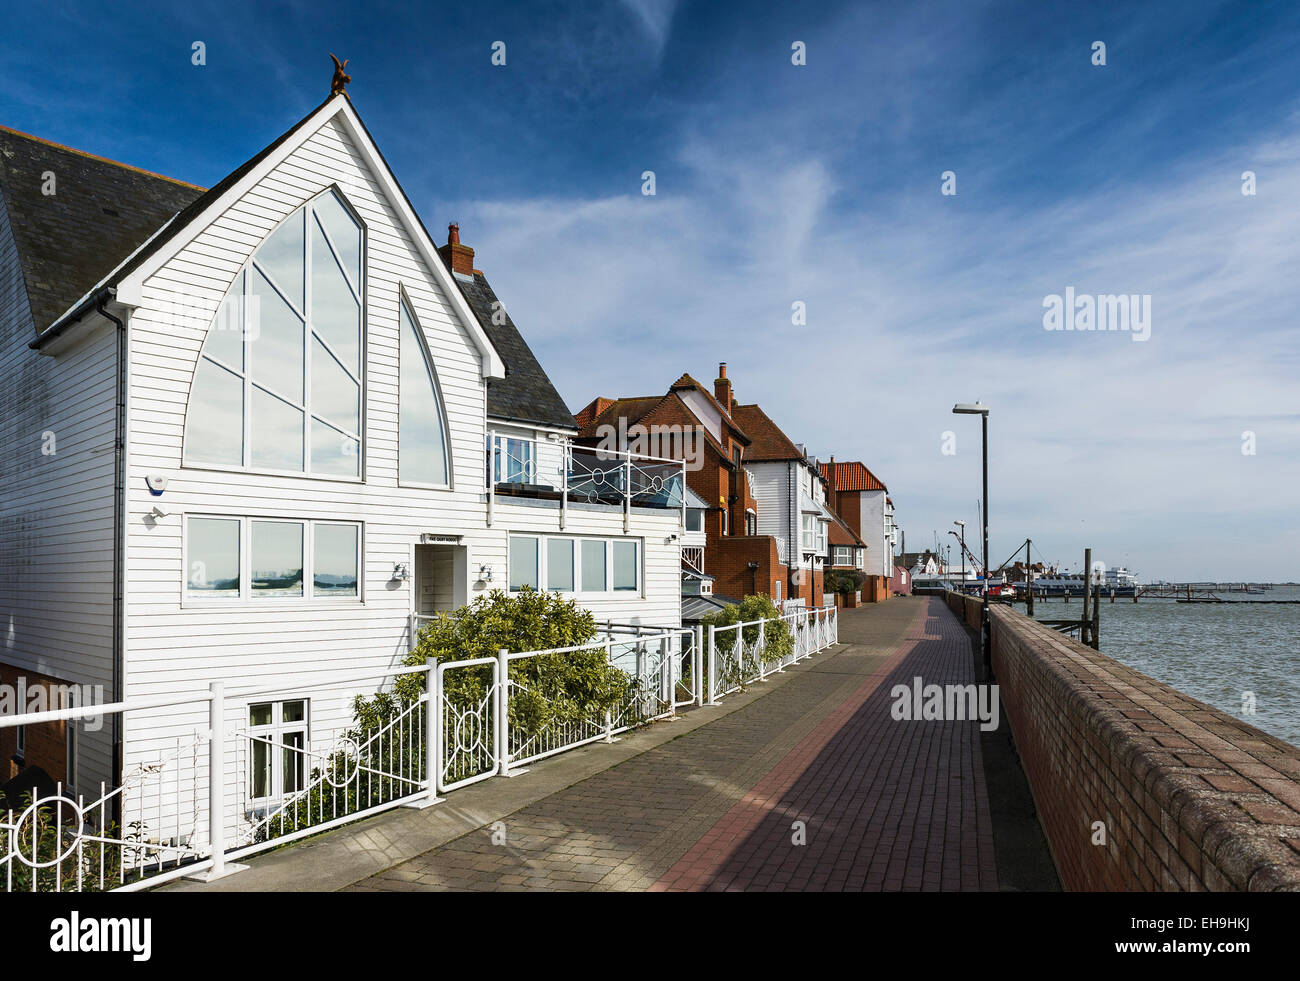 Riverside properties on the banks of the River Crouch at Burnham on Crouch in Essex. Stock Photo